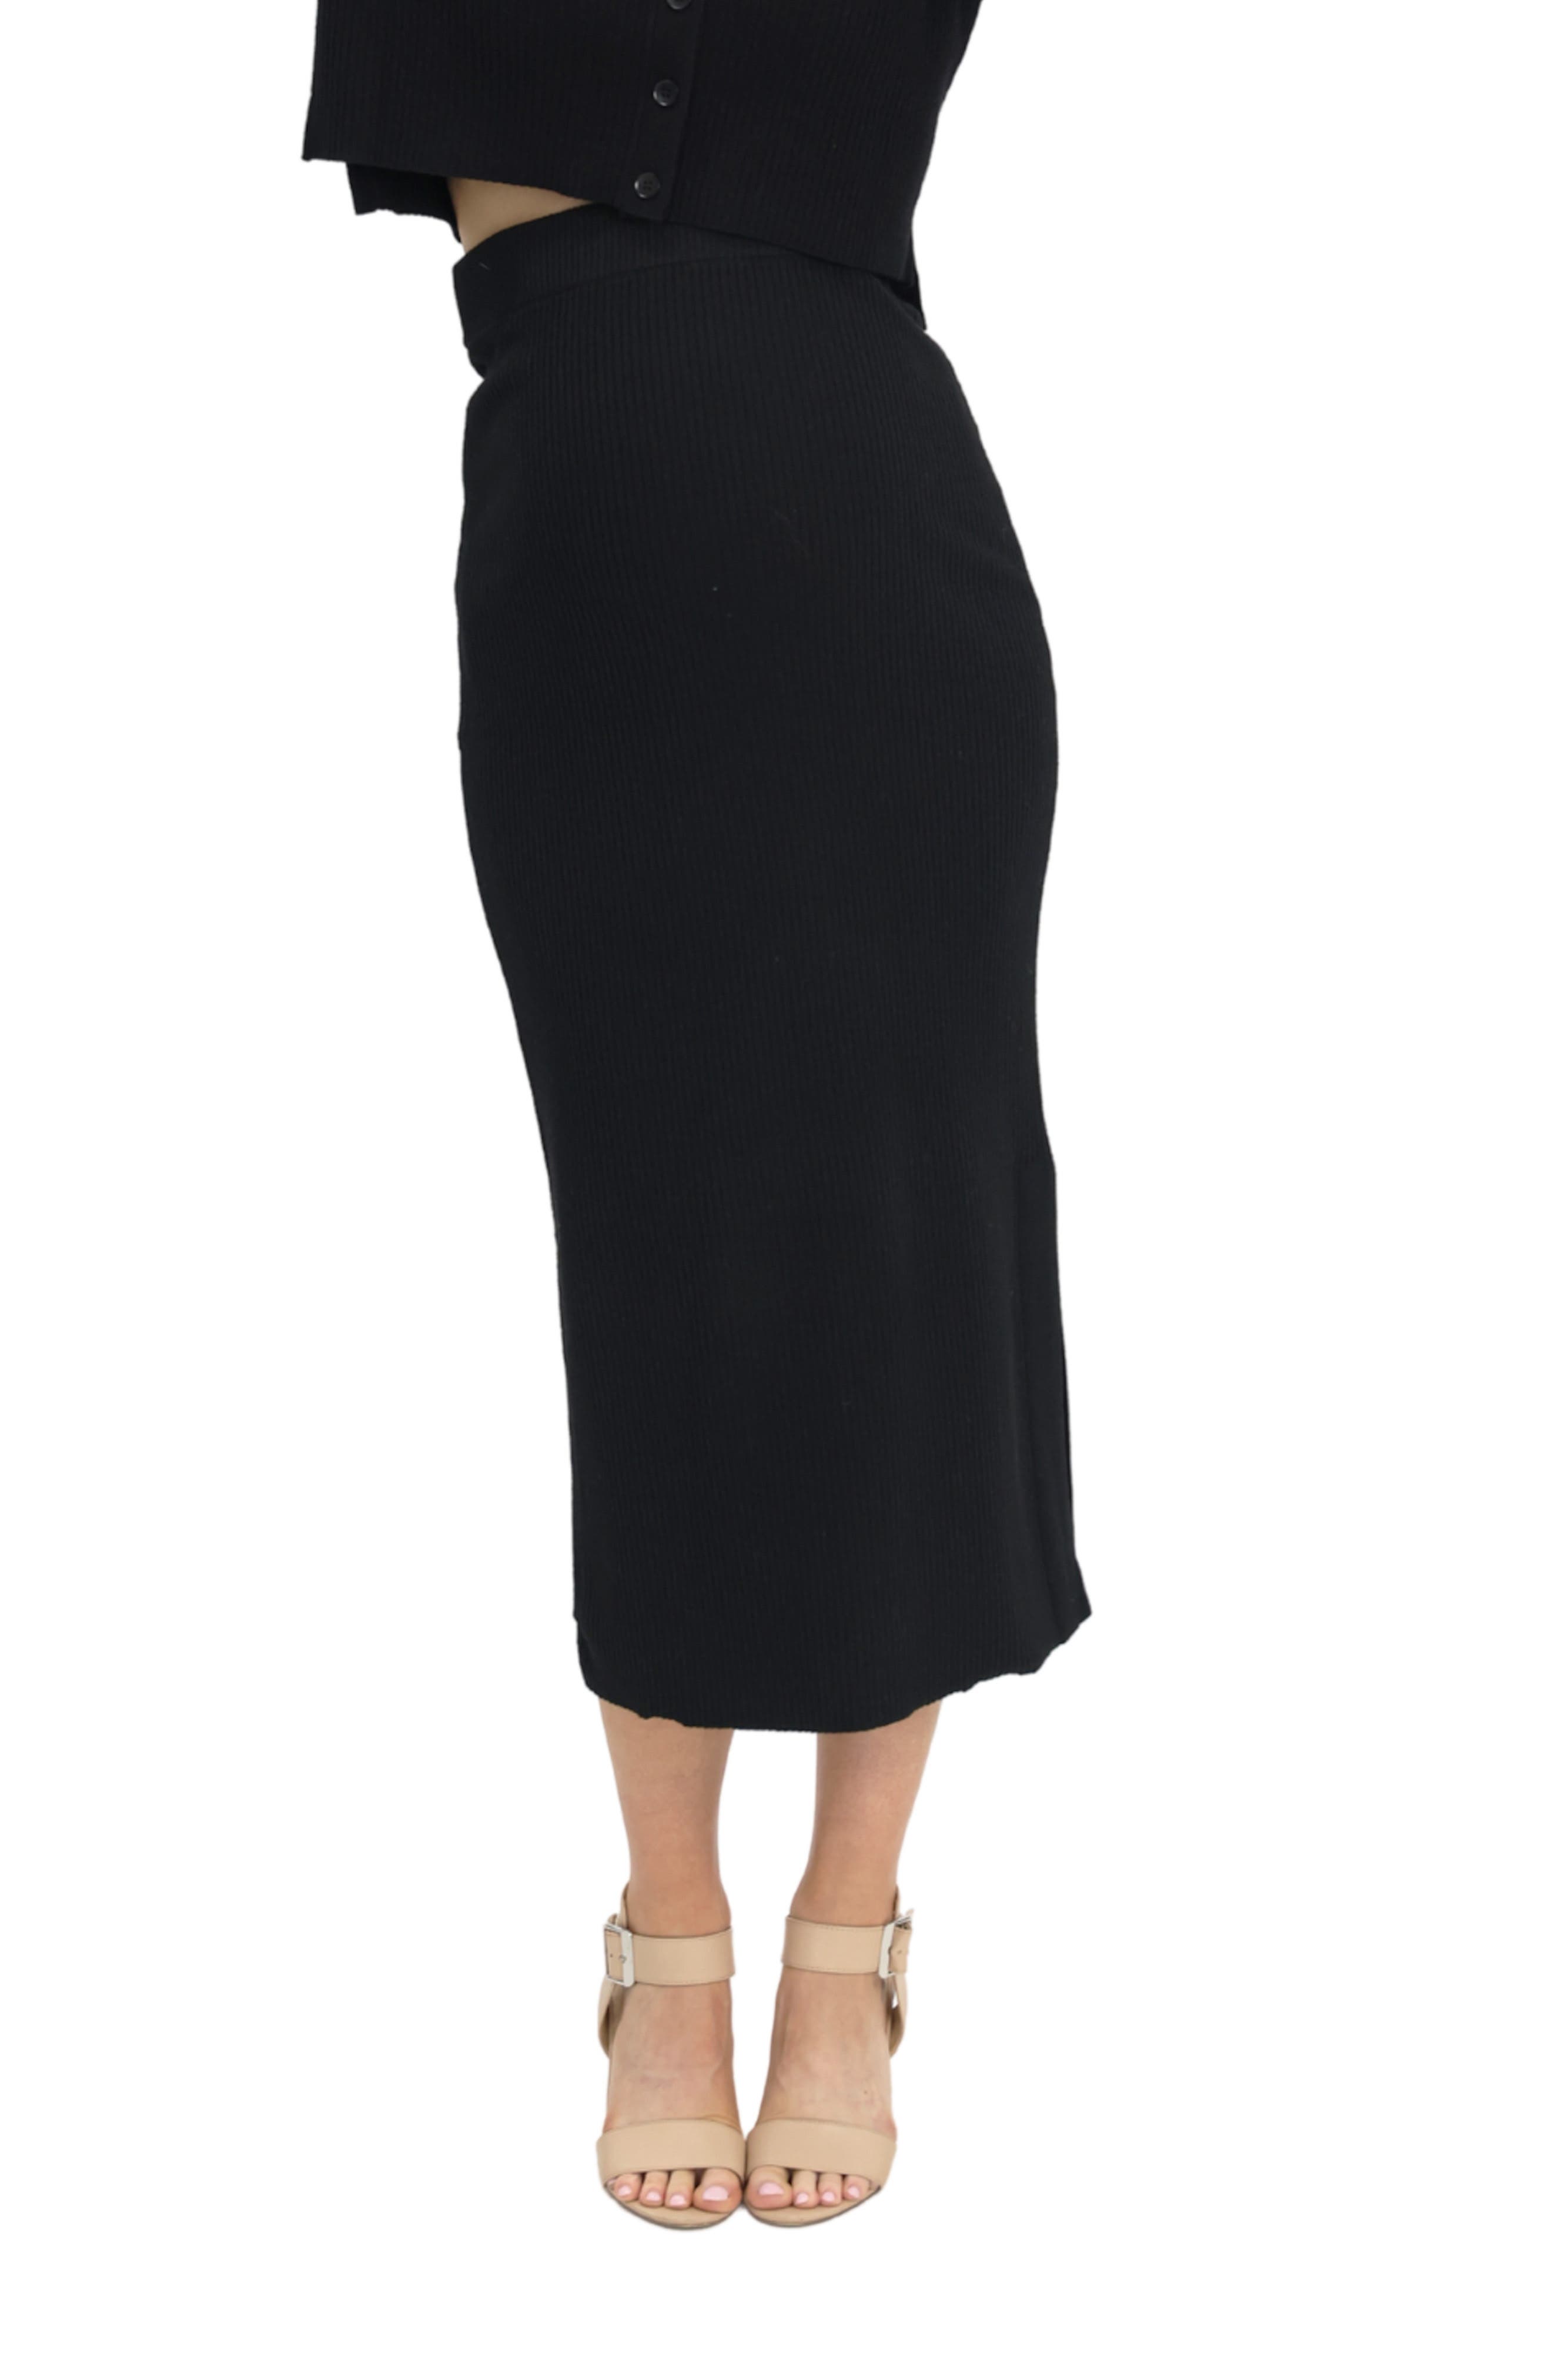 Maternal America Womens Maternity Belly Support Pencil Skirt